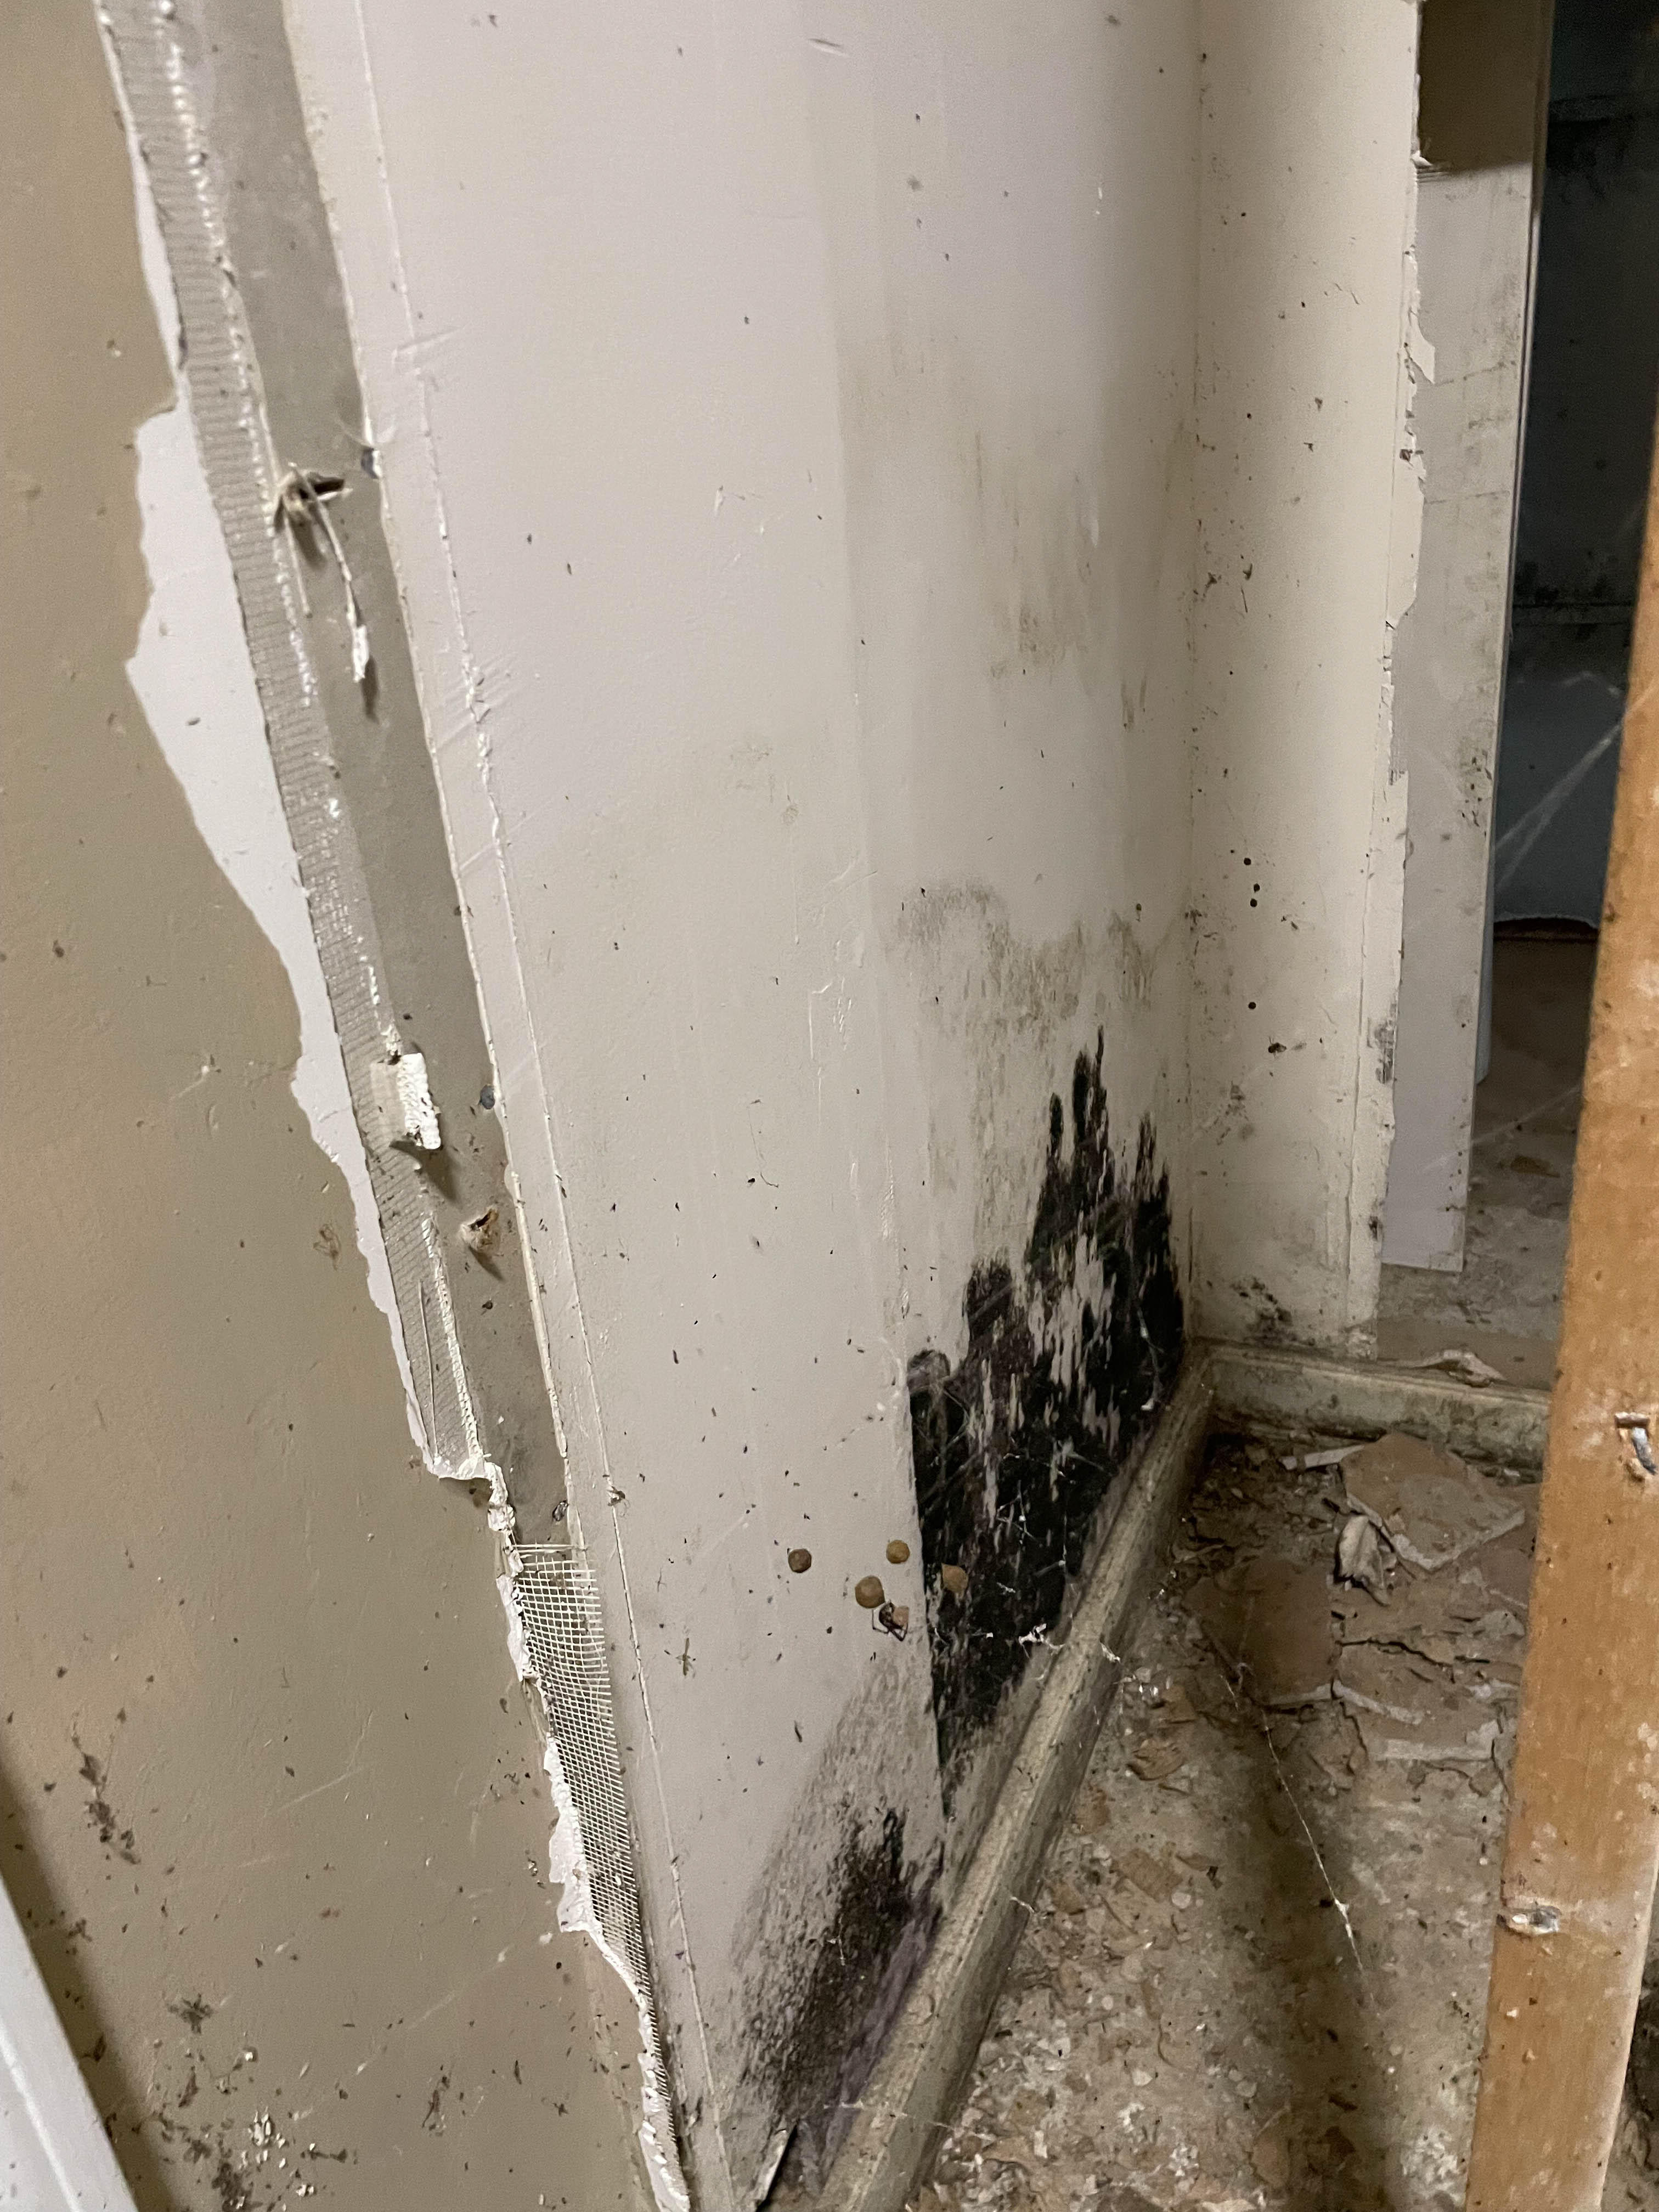 Excess moisture after a water event can lead to multiple secondary issues such as black mold and rot.  SERVPRO of West Knoxville is your trusted local leader in water and mold restoration. Give us a call!